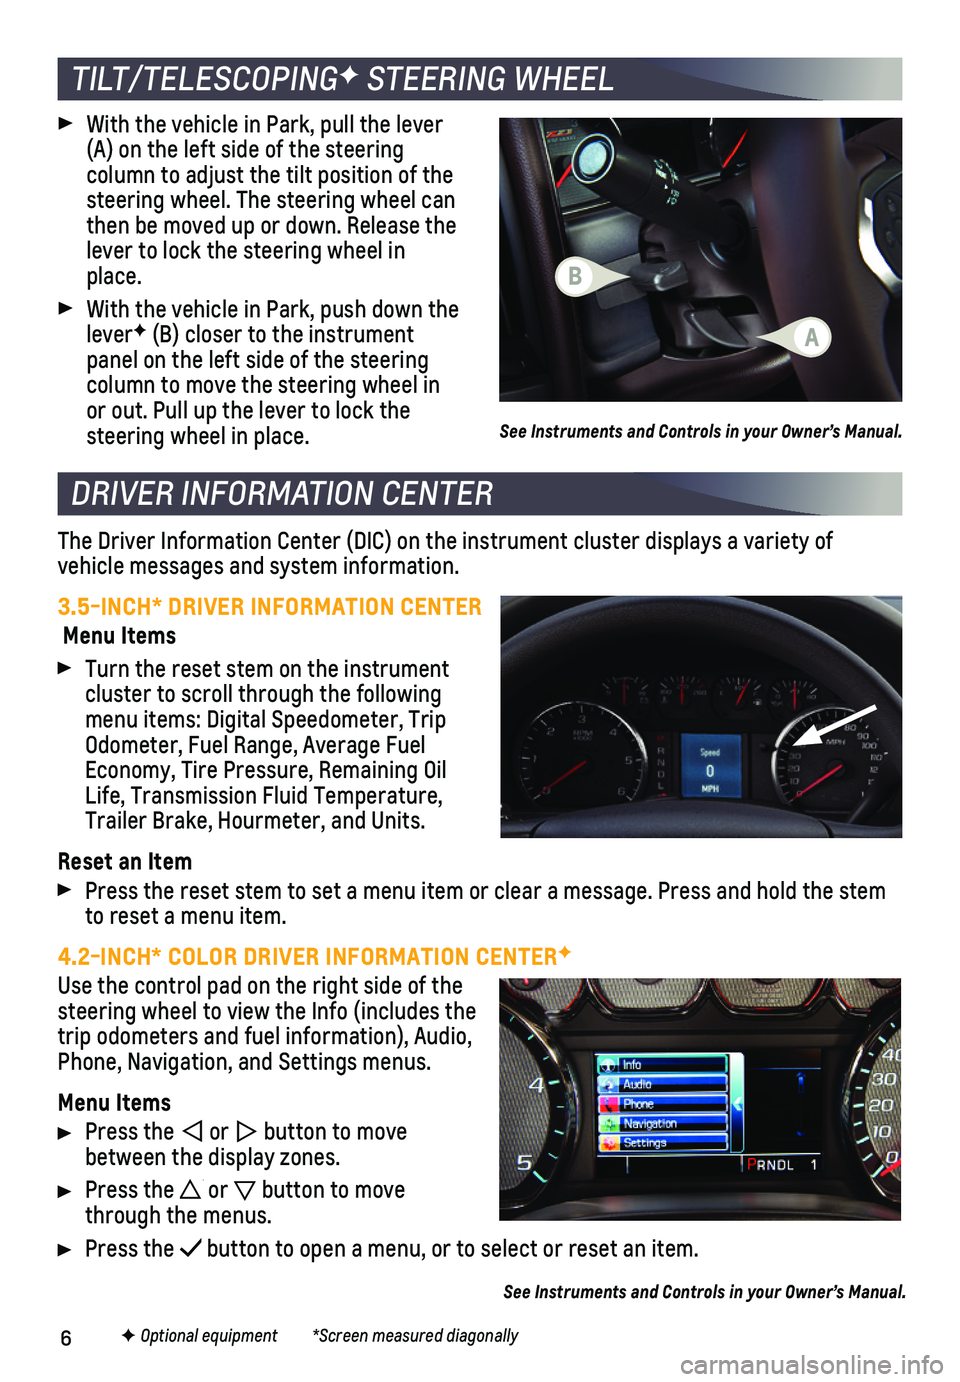 CHEVROLET SILVERADO 1500 LD 2019  Get To Know Guide 6
TILT/TELESCOPINGF STEERING WHEEL
 With the vehicle in Park, pull the lever (A) on the left side of the steering  
column to adjust the tilt position of the steering wheel. The steering wheel can the